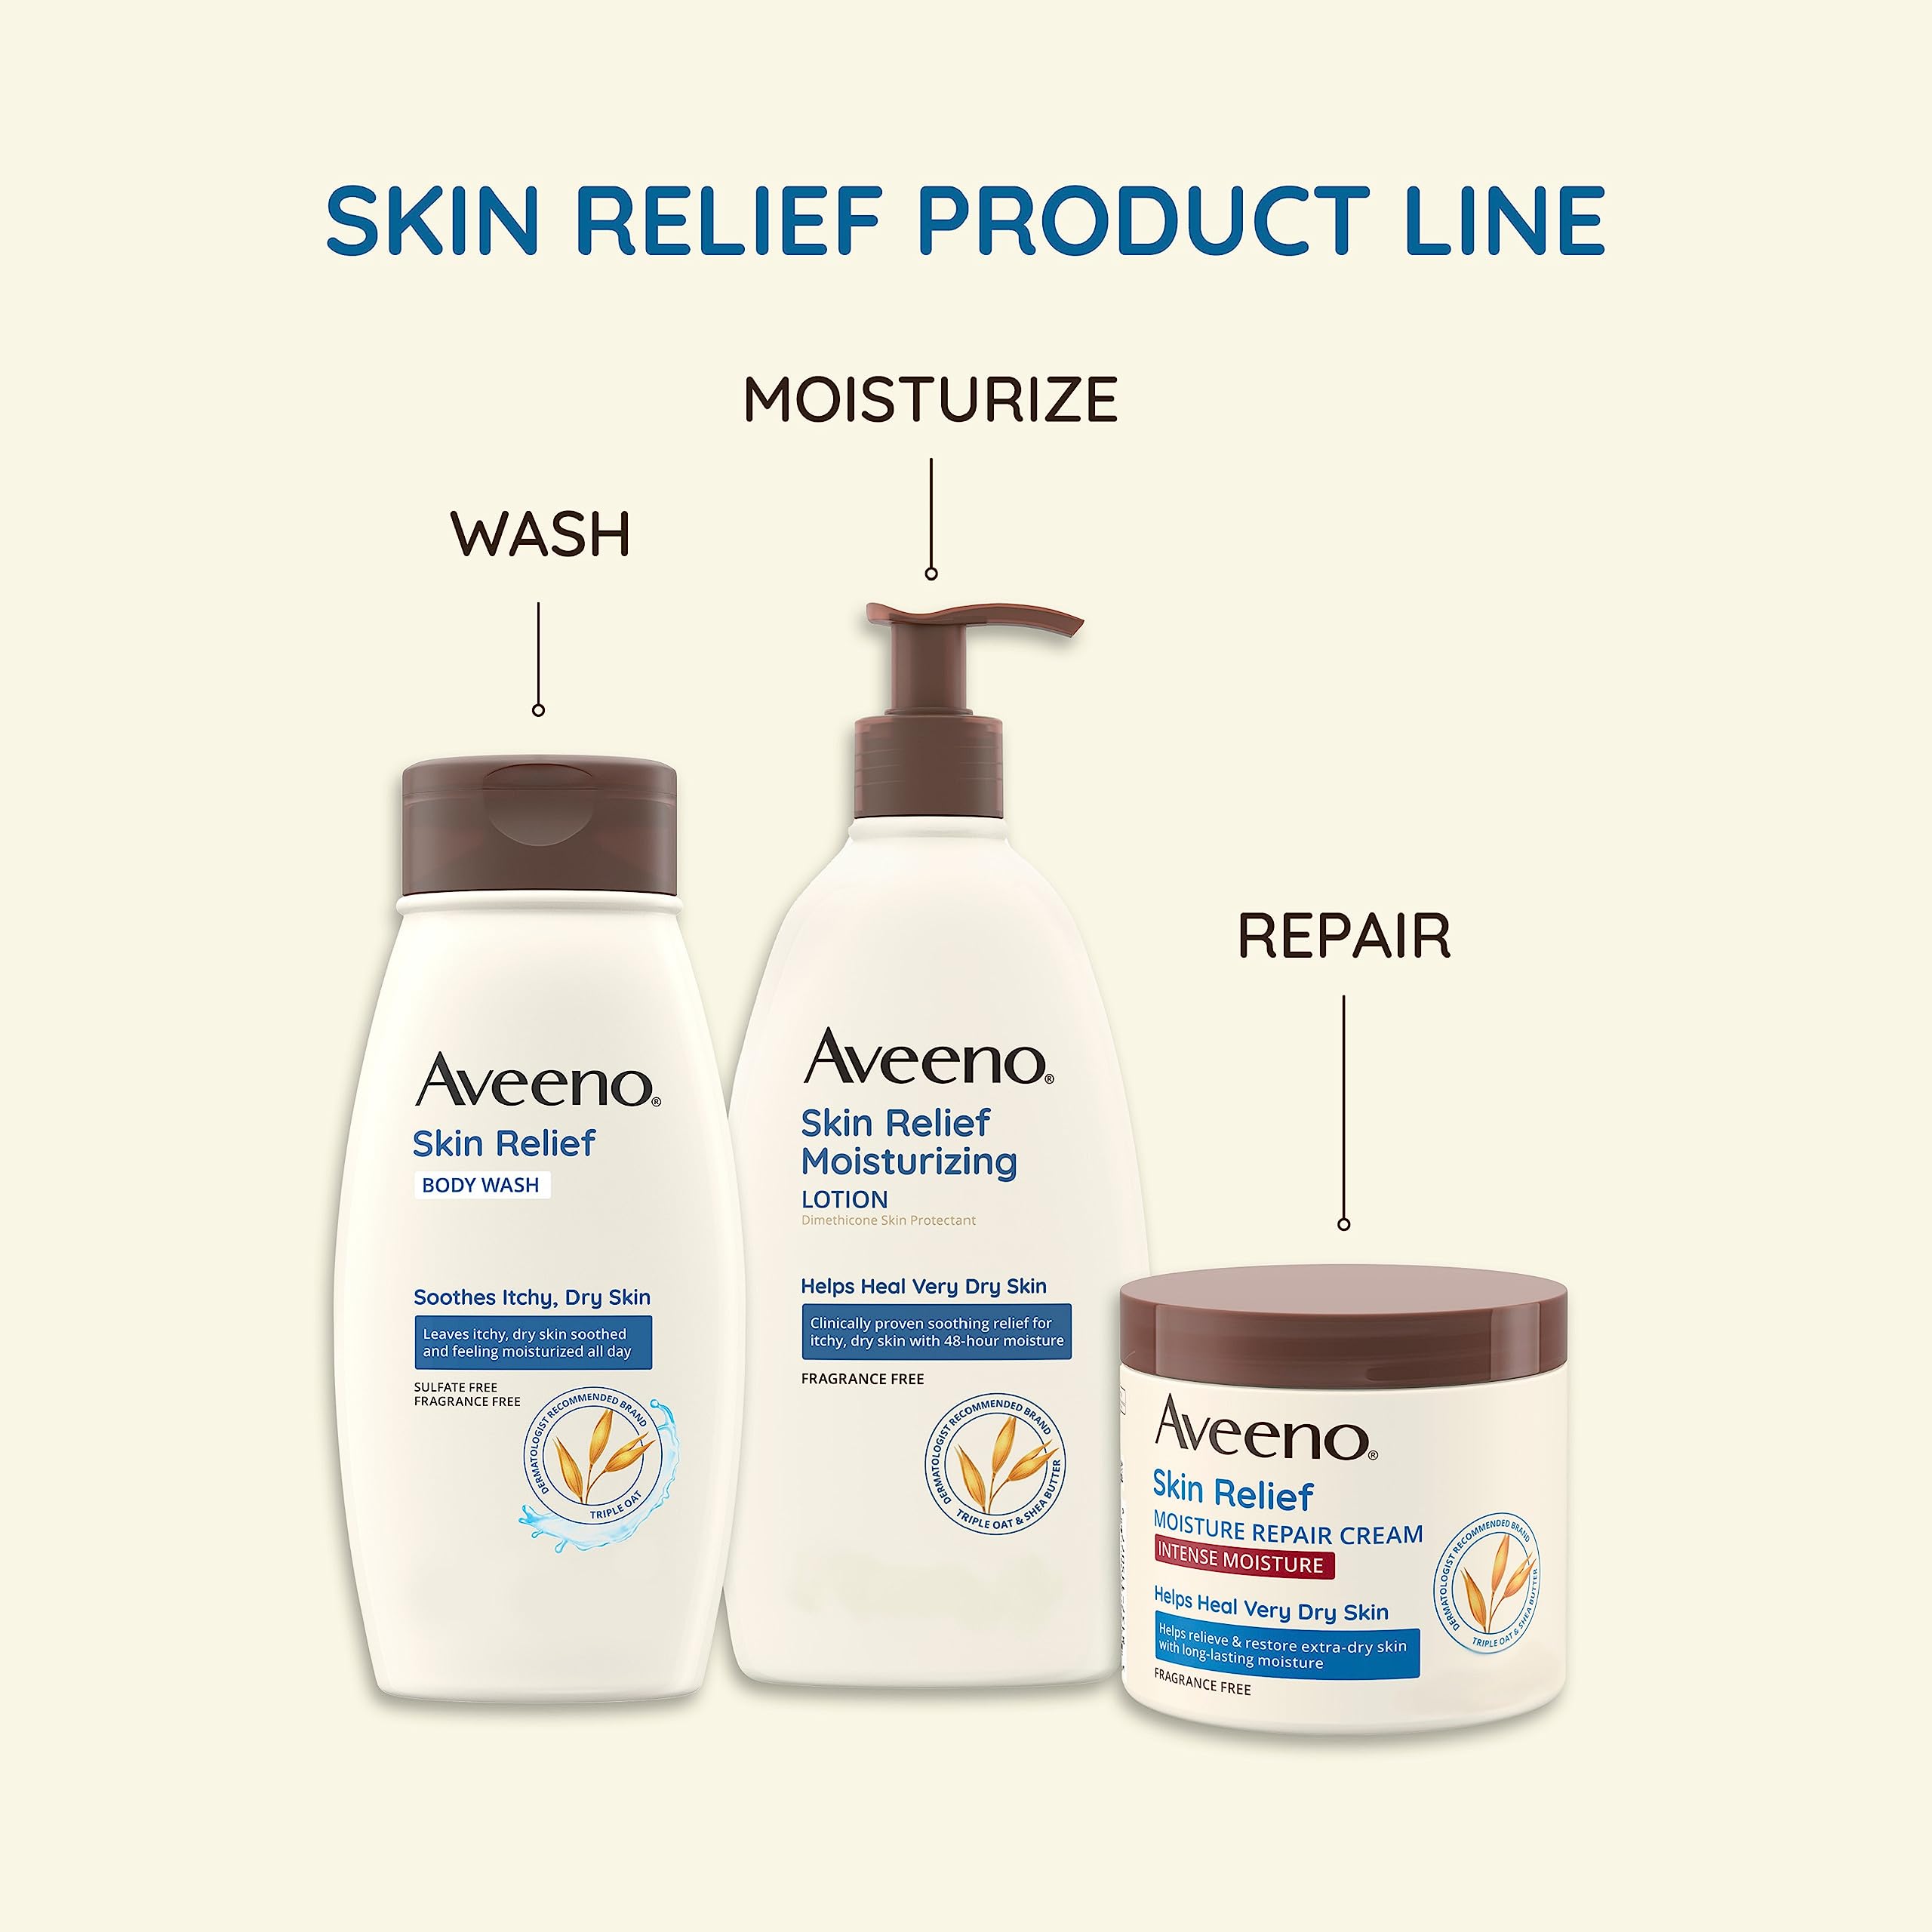 Aveeno Skin Relief 24-Hour Moisturizing Lotion for Sensitive Skin with Natural Shea Butter & Triple Oat Complex, Unscented Therapeutic Lotion for Extra Dry, Itchy Skin, 12 fl. oz